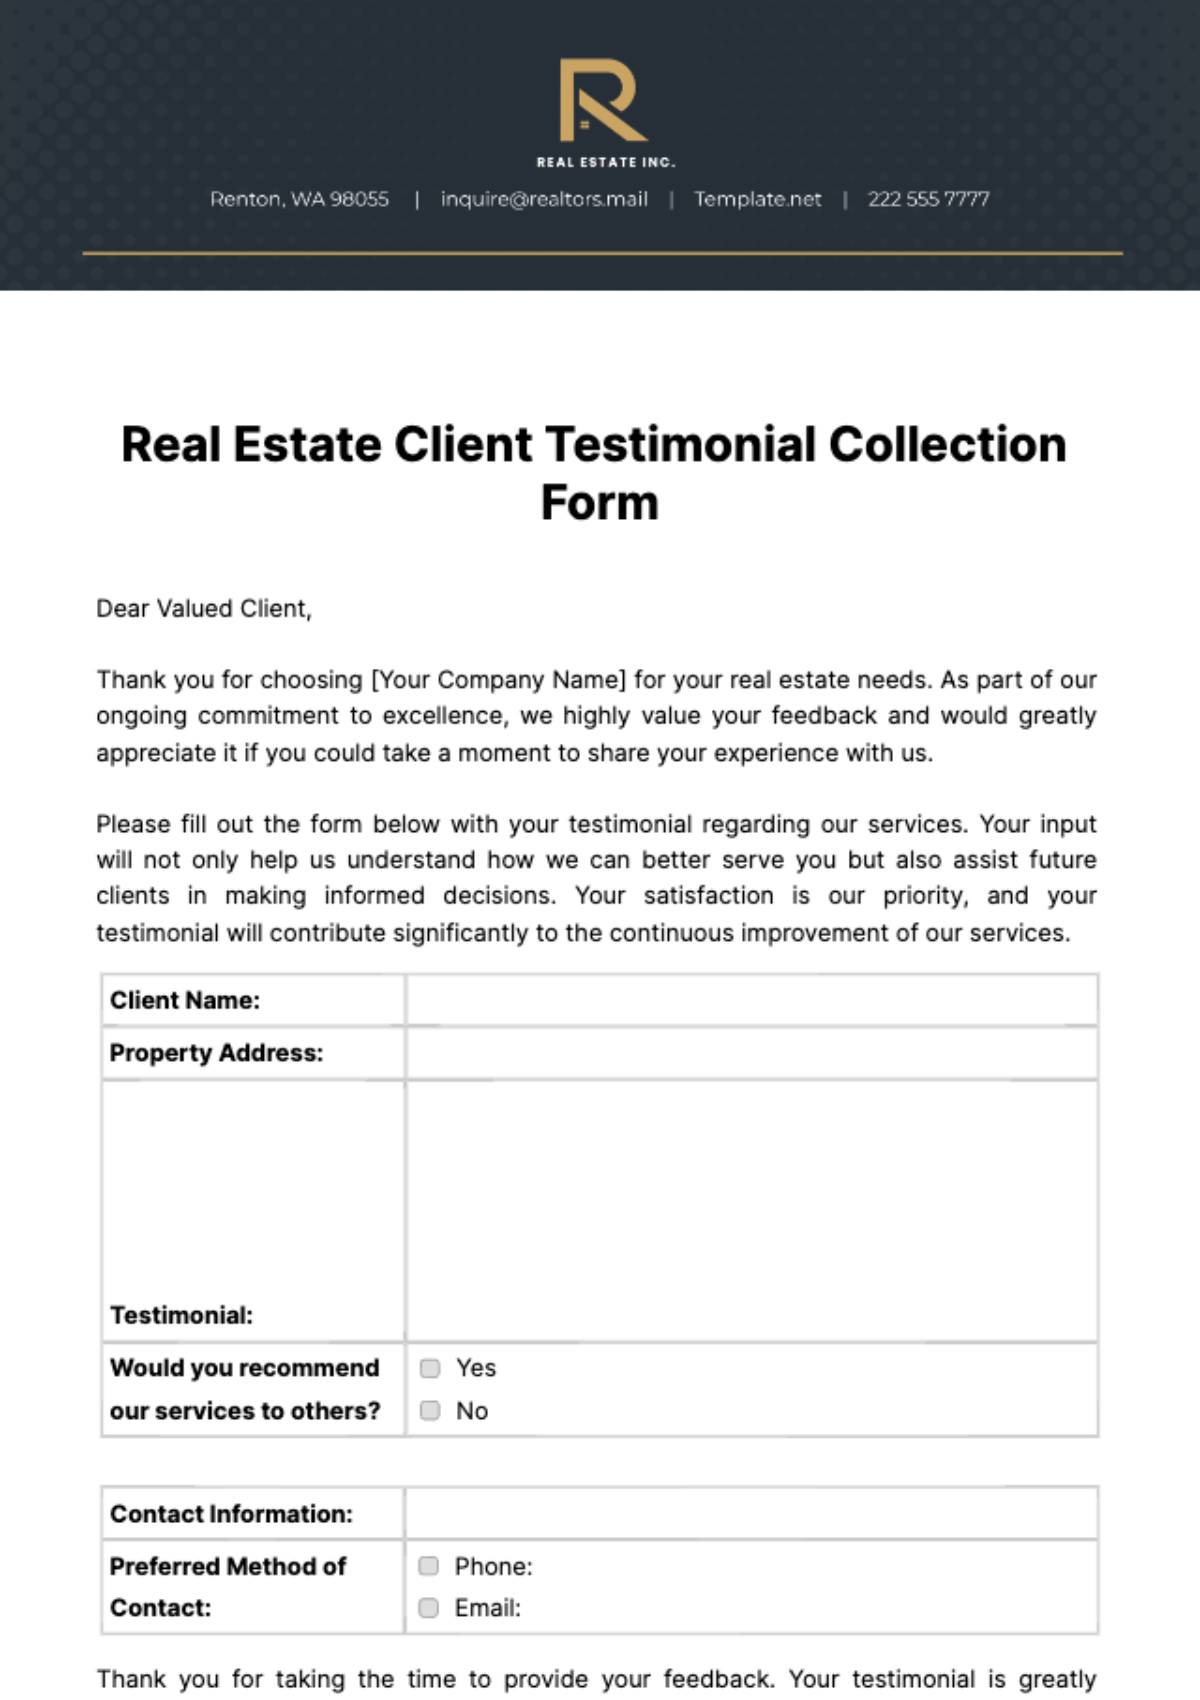 Real Estate Client Testimonial Collection Form Template